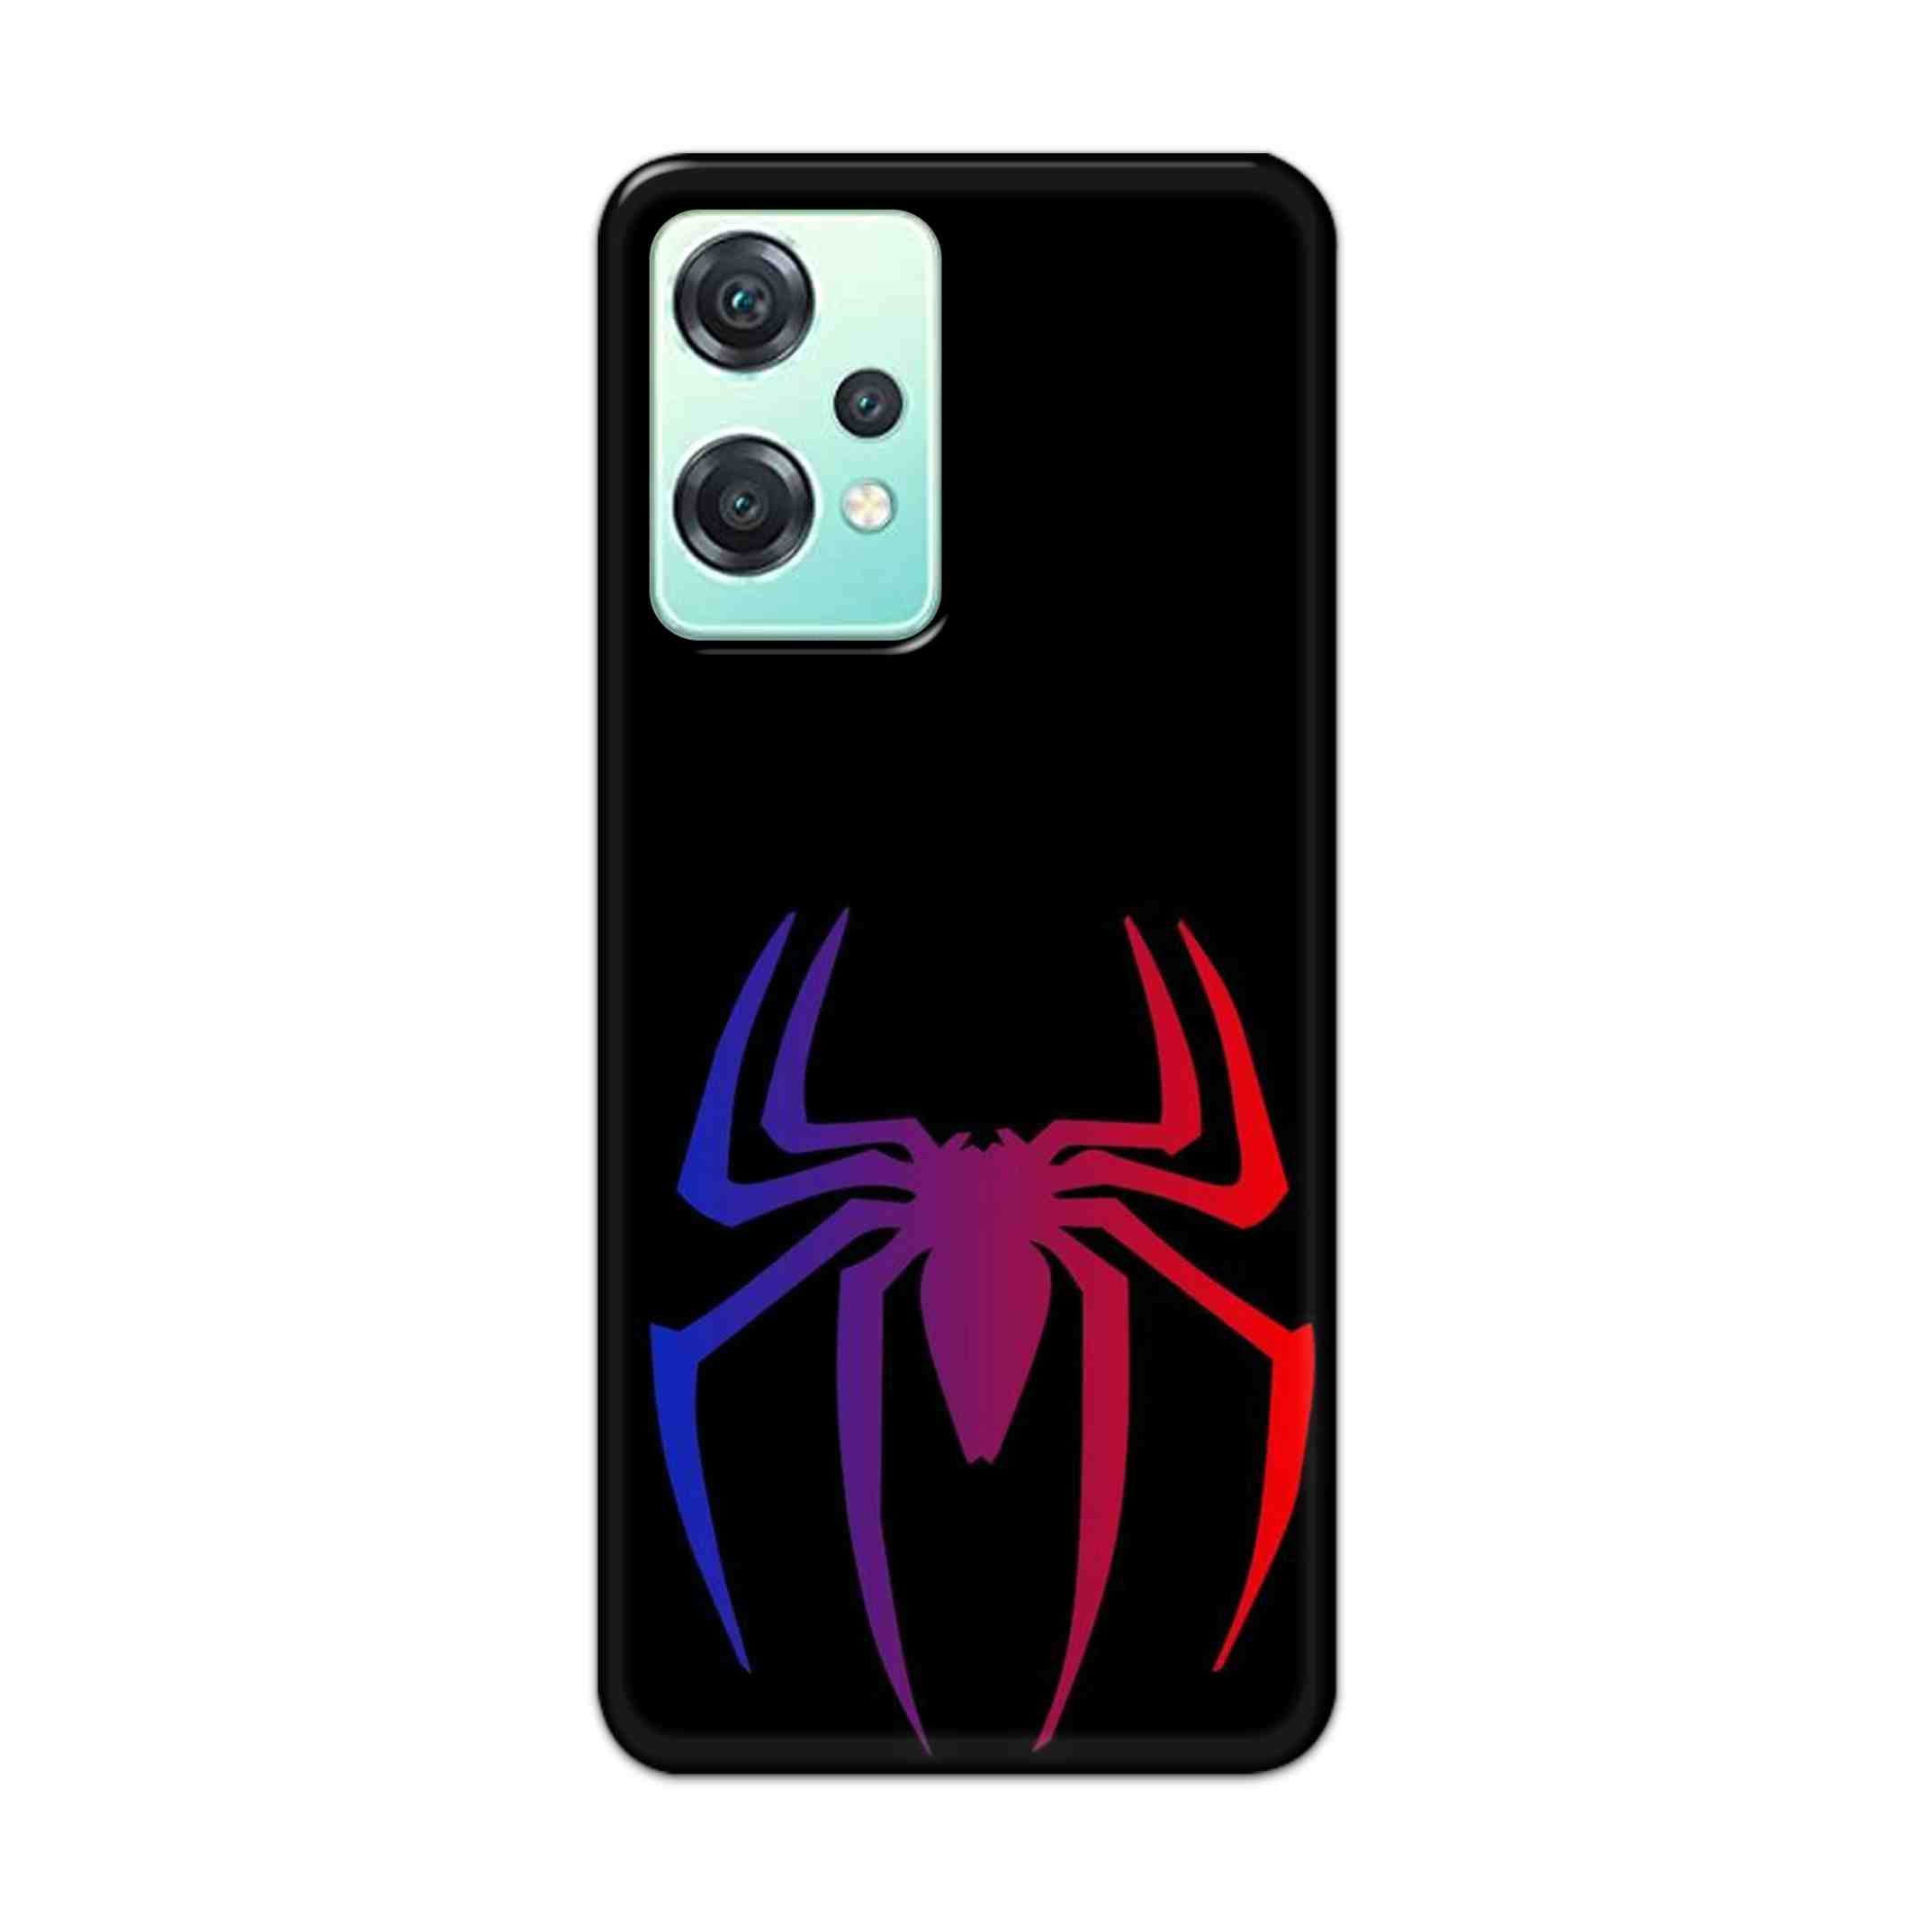 Buy Neon Spiderman Logo Hard Back Mobile Phone Case Cover For OnePlus Nord CE 2 Lite 5G Online